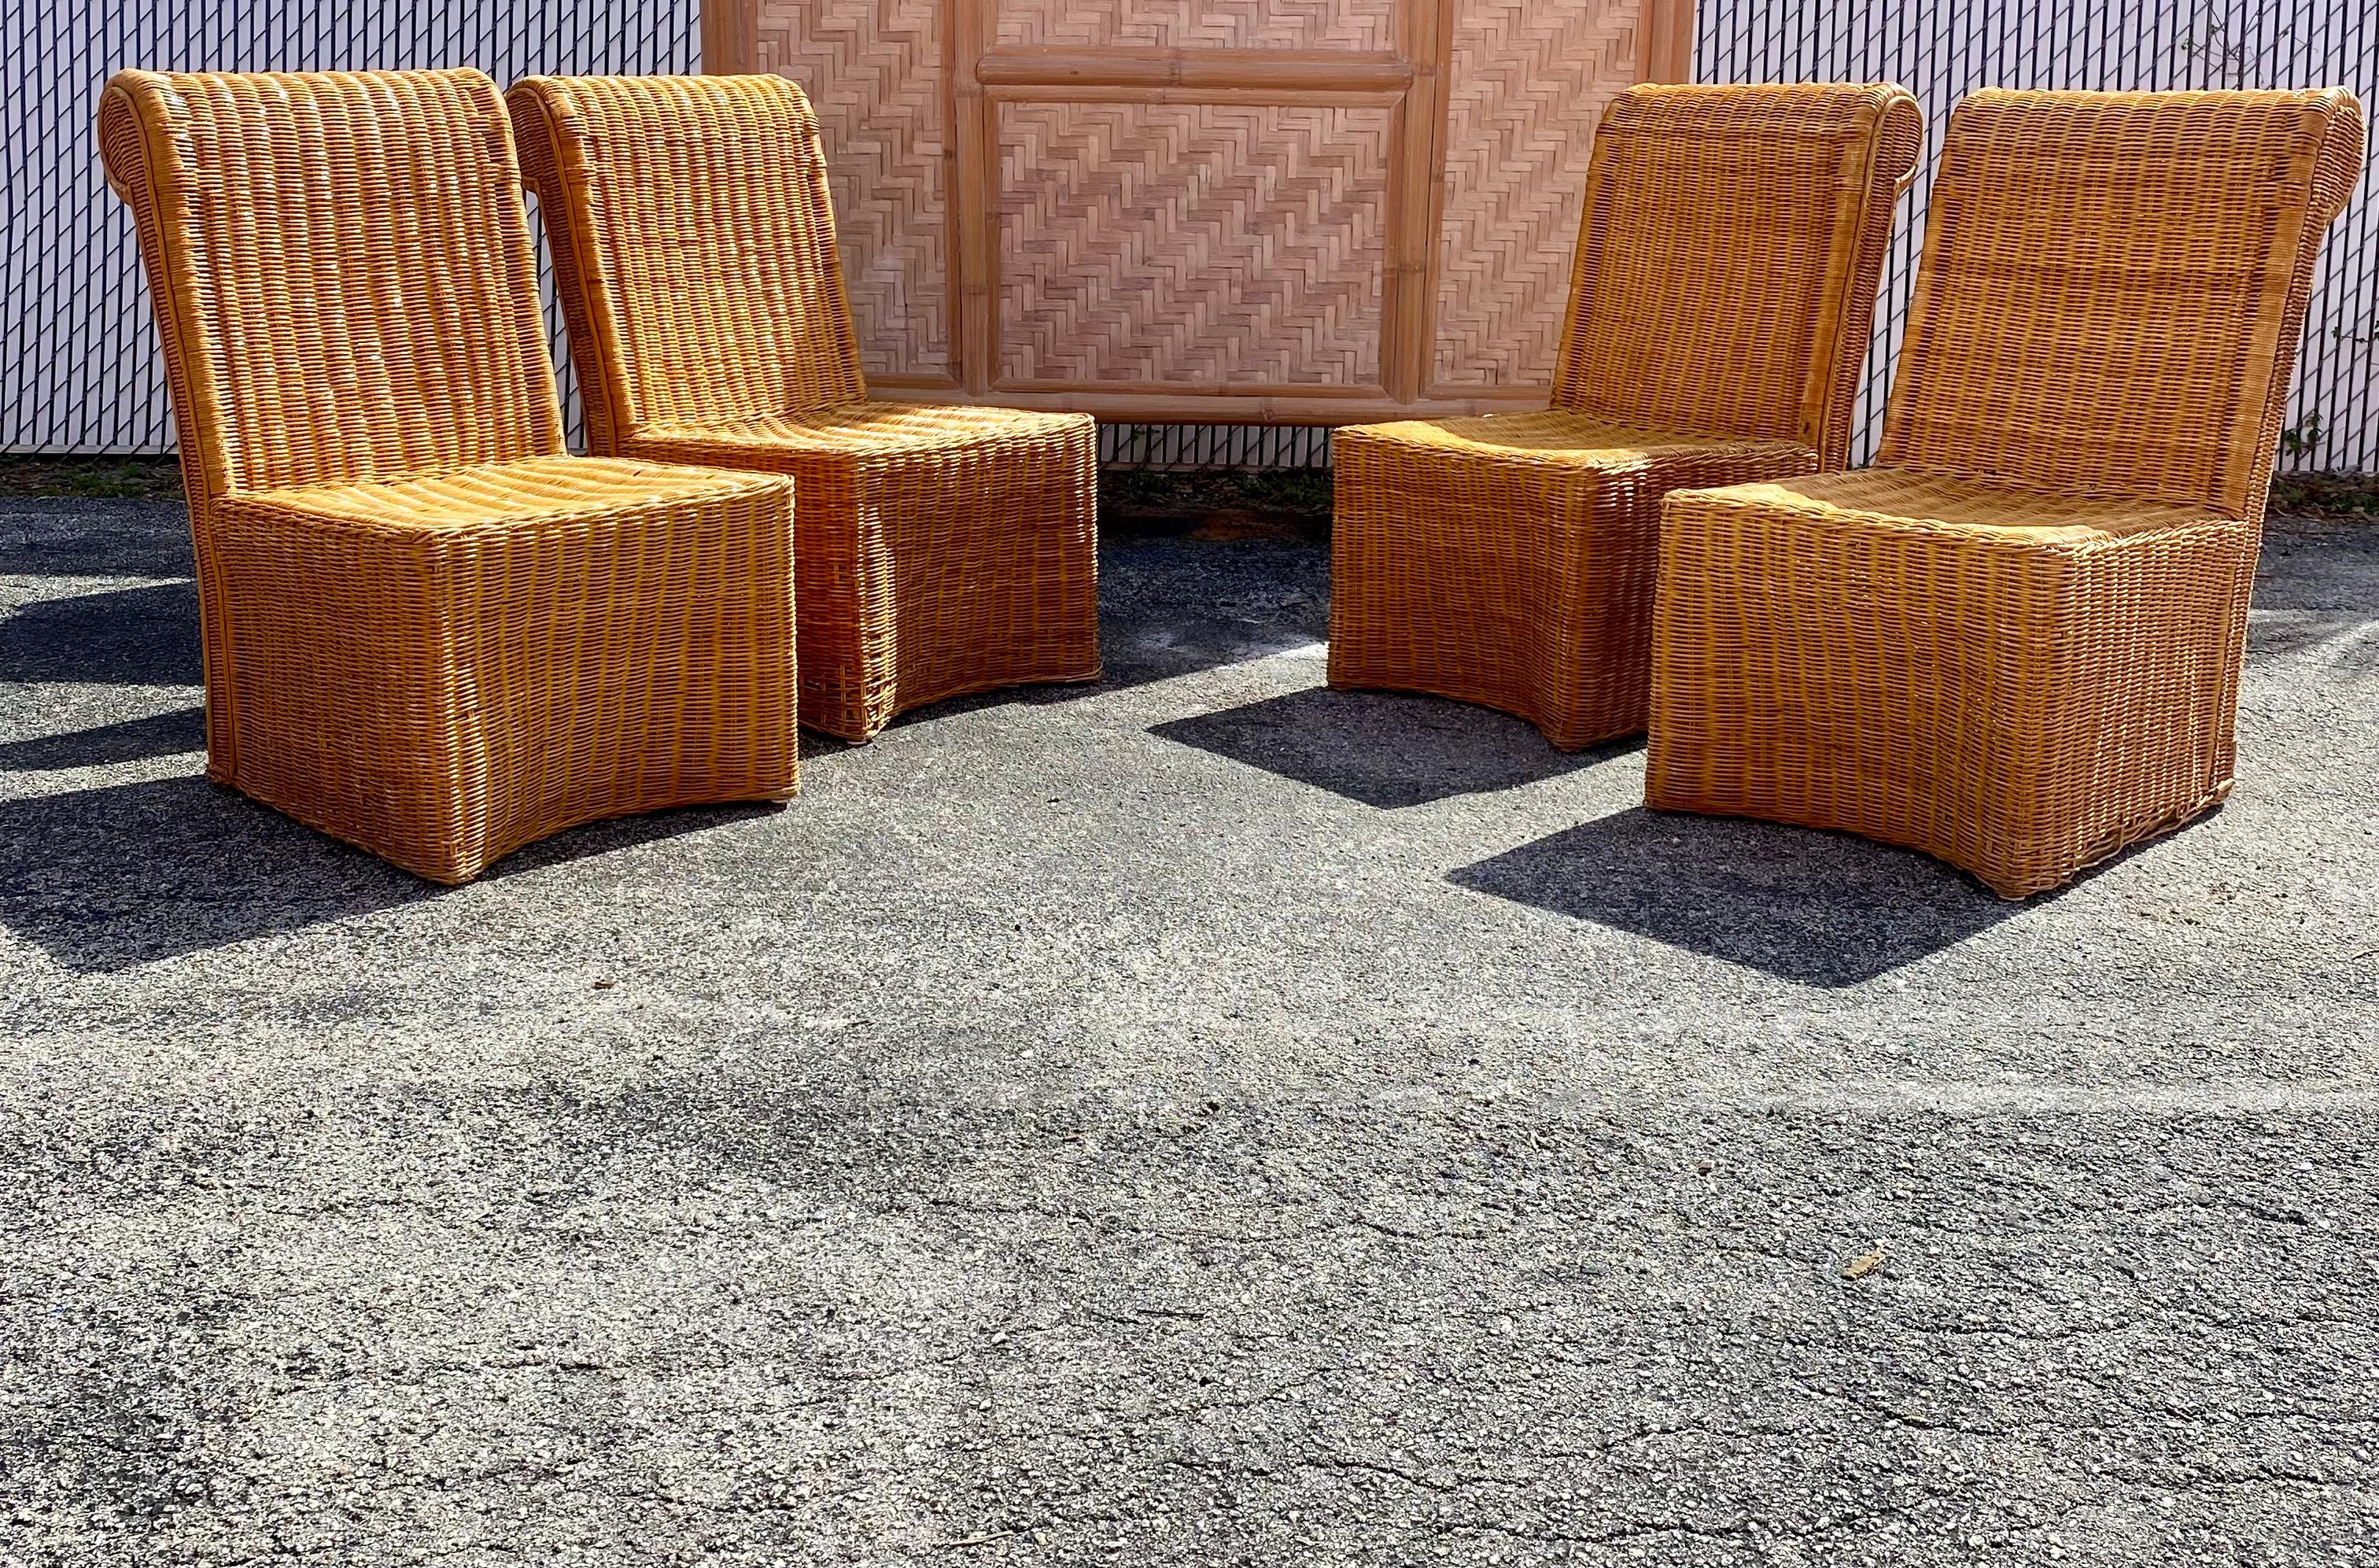 On offer on this occasion is one of the most stunning and rare sculptural rattan dining chairs set you could hope to find. Outstanding design is exhibited throughout. The beautiful set is statement piece which is also extremely comfortable and